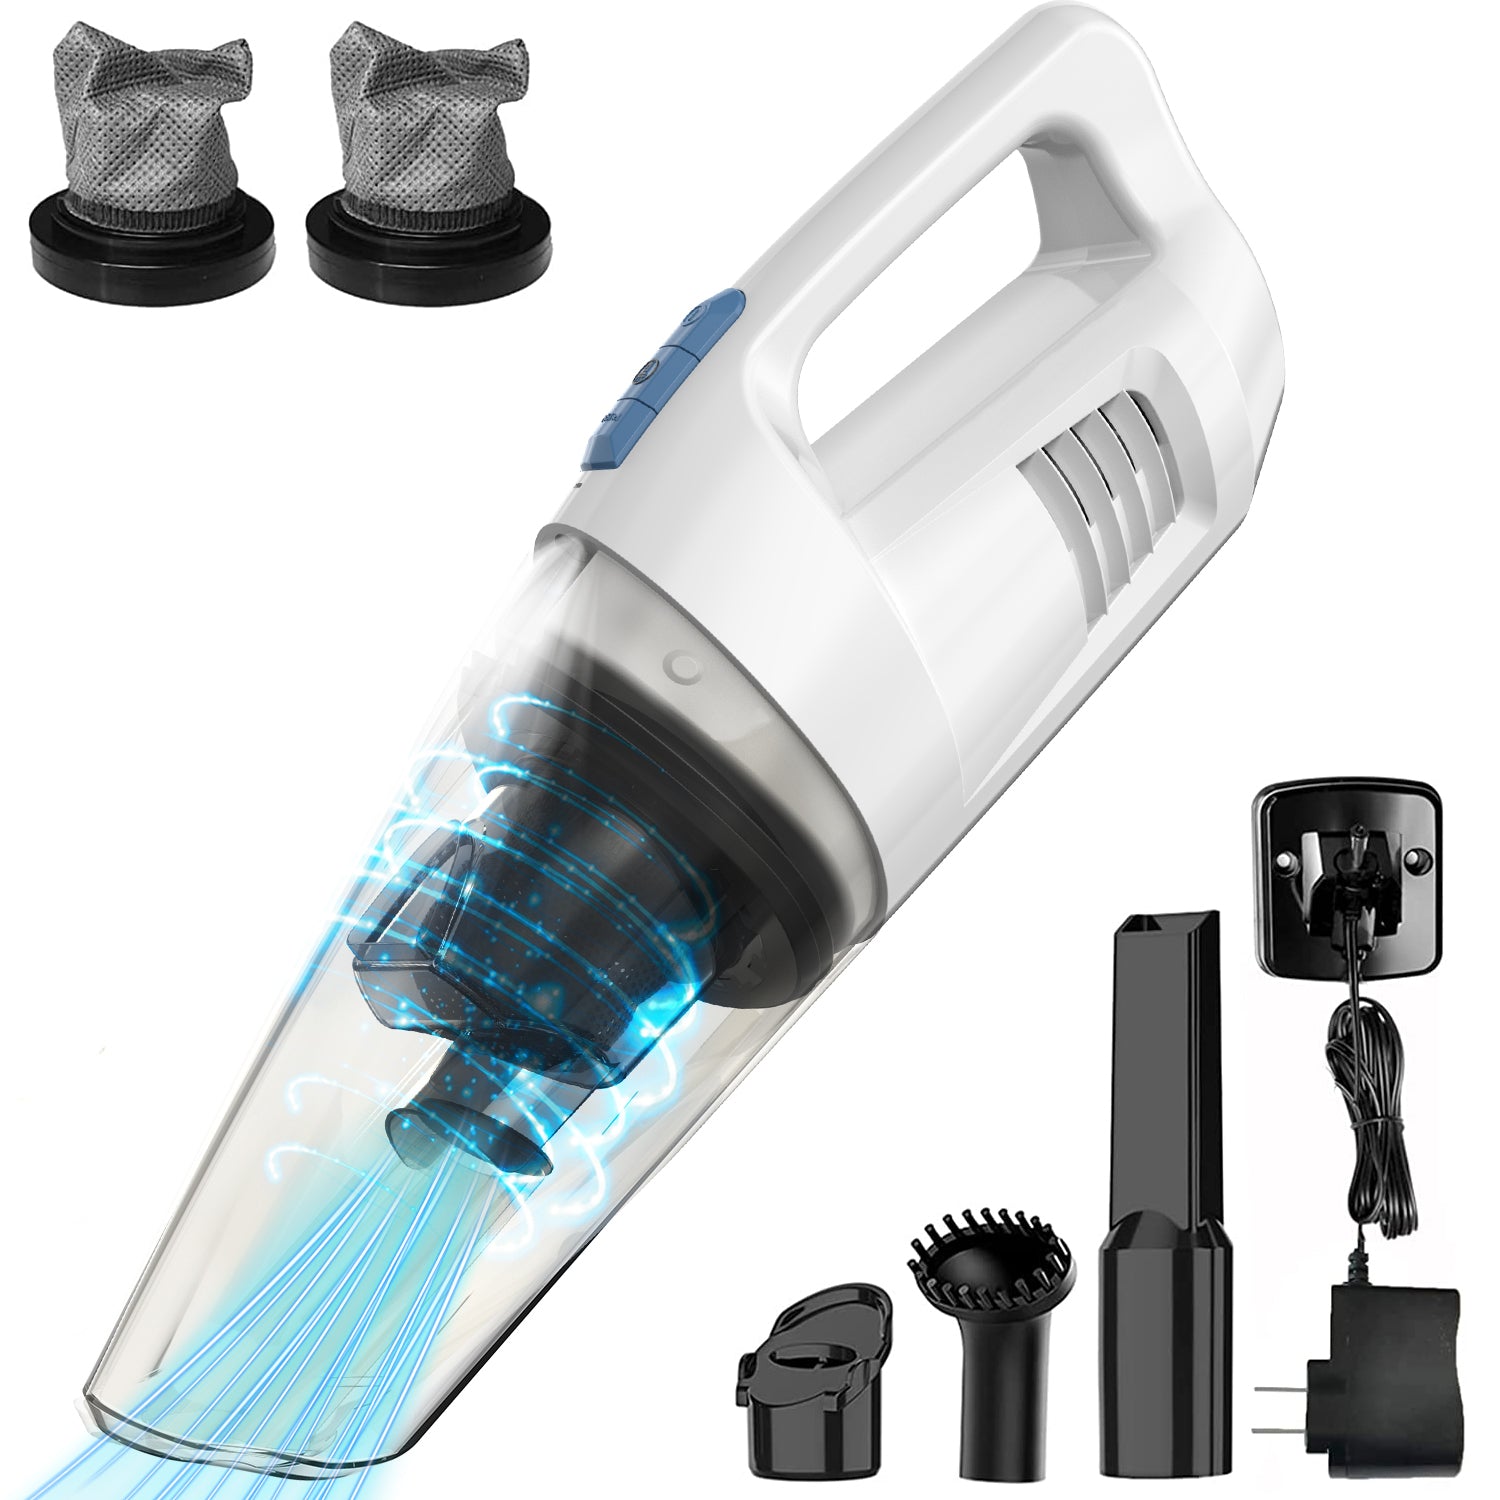 WHALL® Cordless Handheld Vacuum, Wet/Dry Cleaner with 8500PA Suction, LED Light, Lightweight/Portable(White)